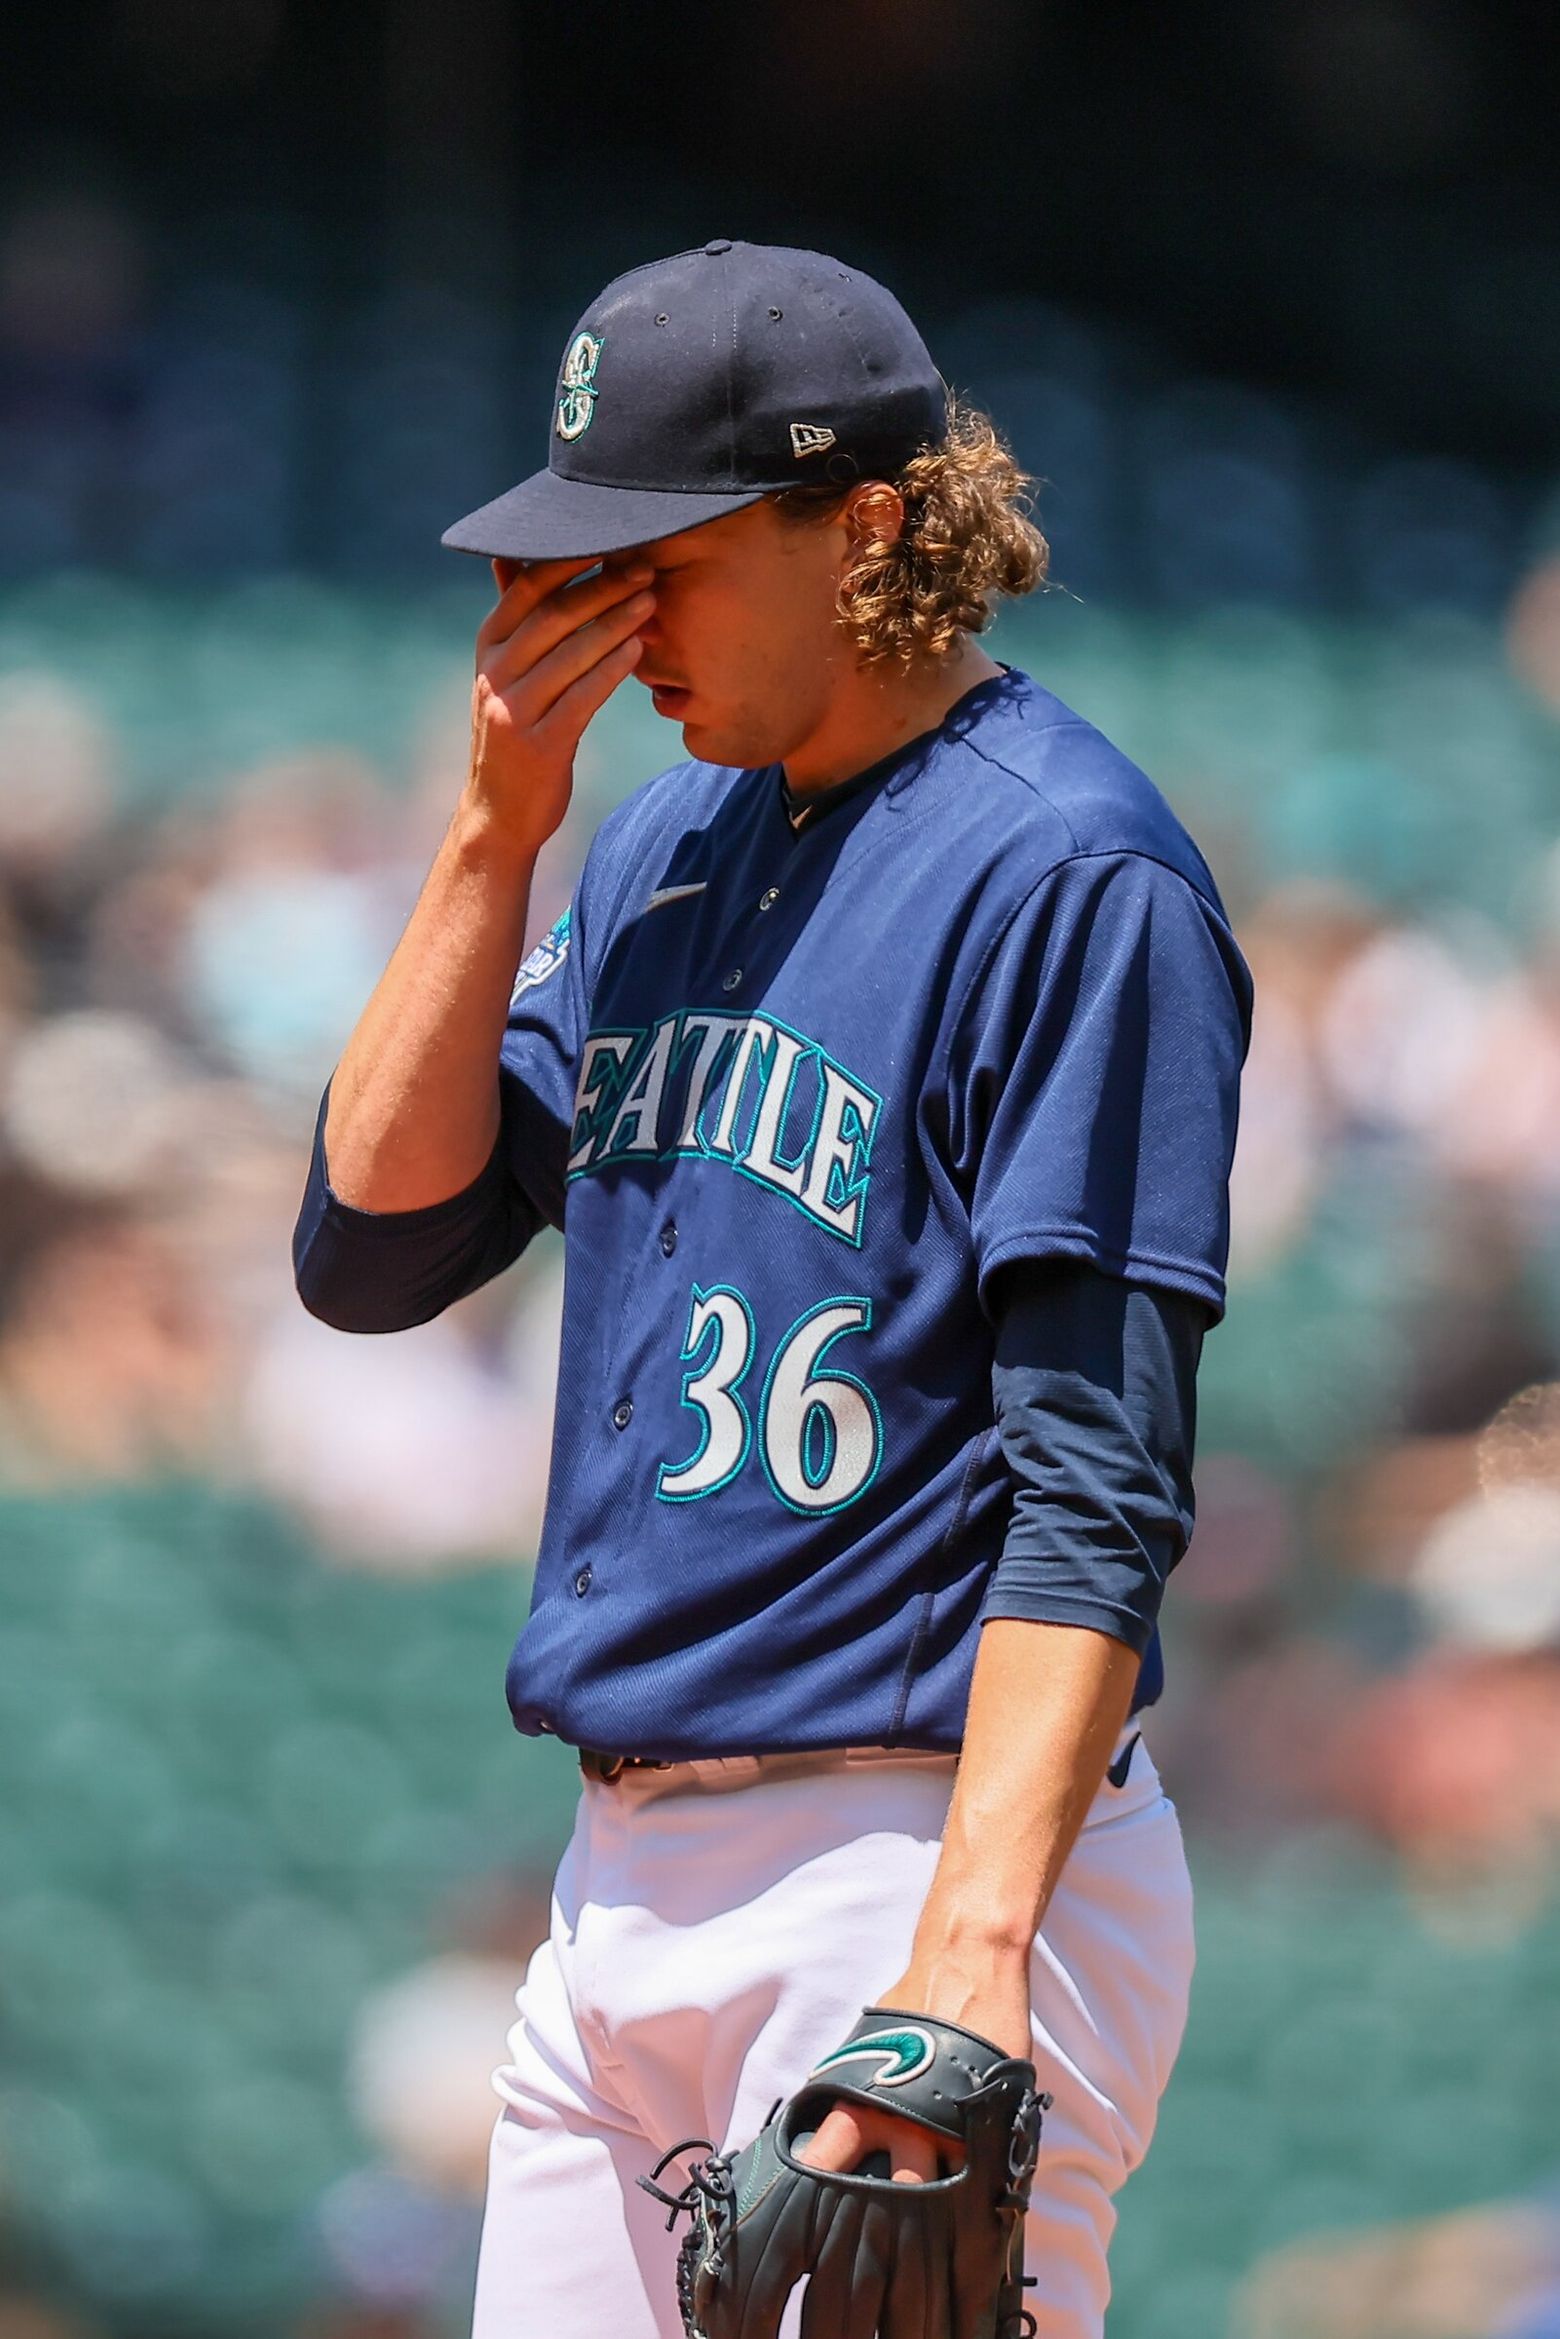 Mariners deserve the boos aimed at them after dismal series loss